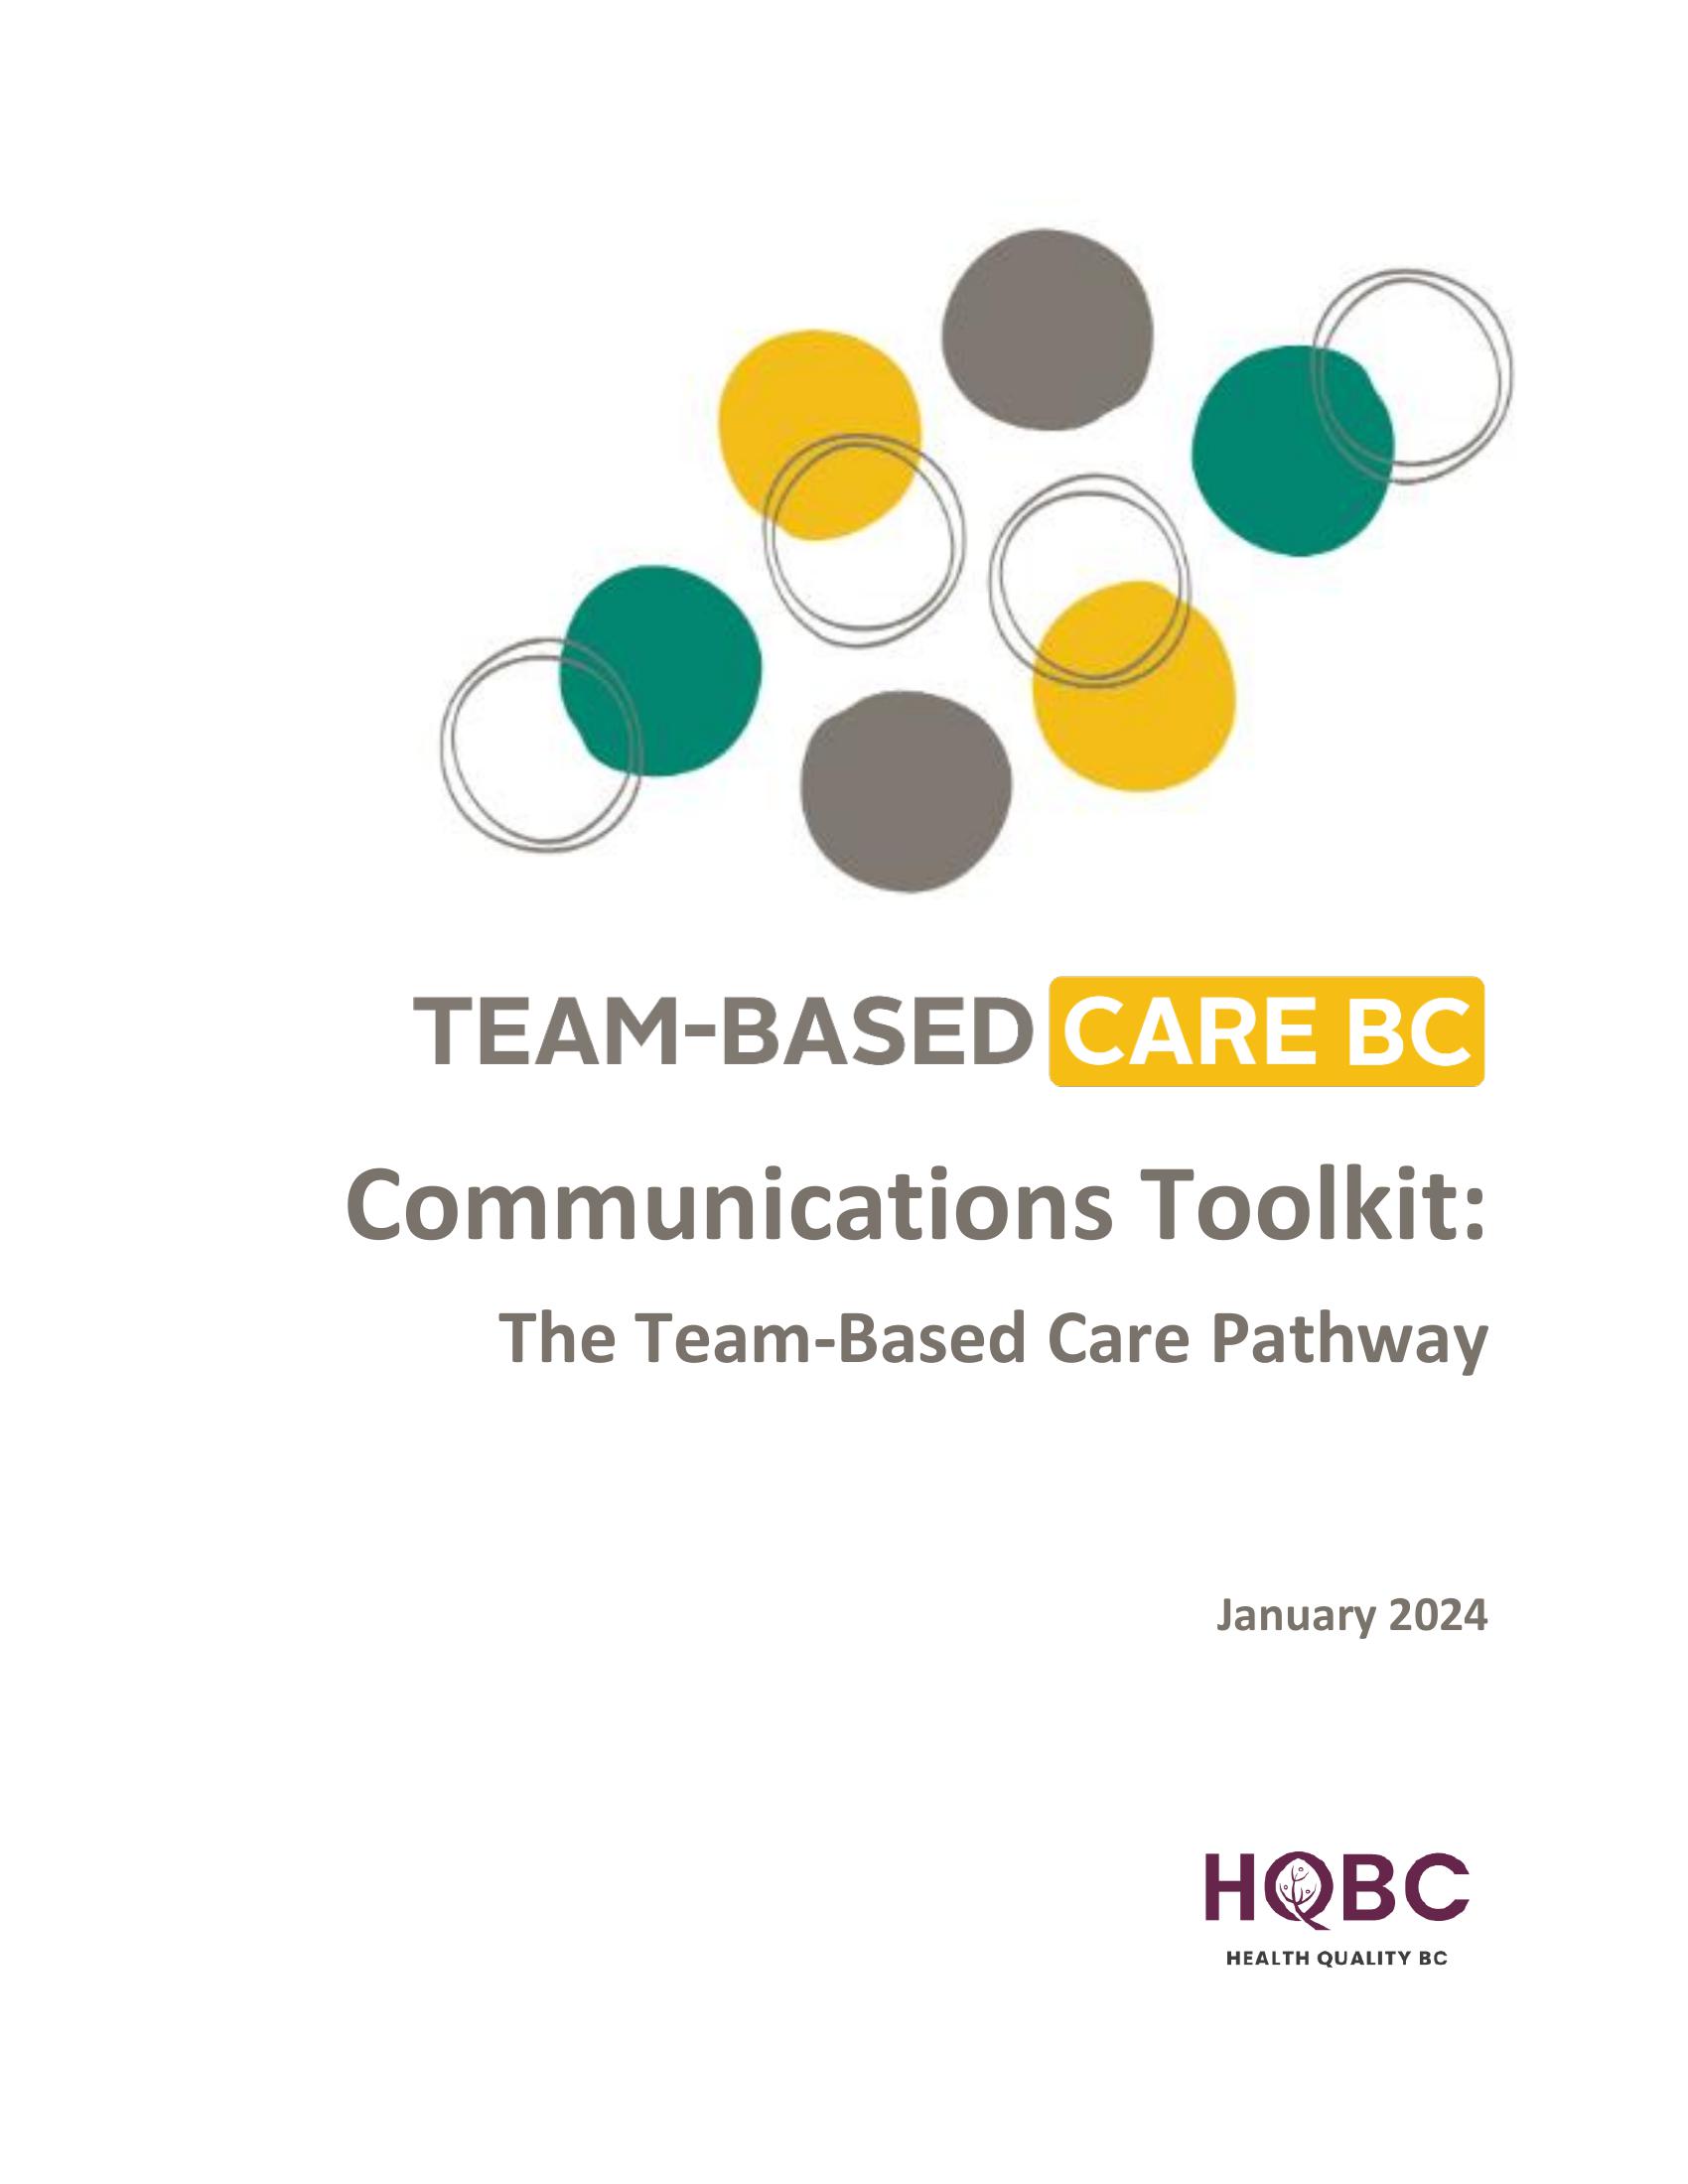 Team-Based-Care-BC-Communications-Toolkit-Team-Based-Care-Pathway